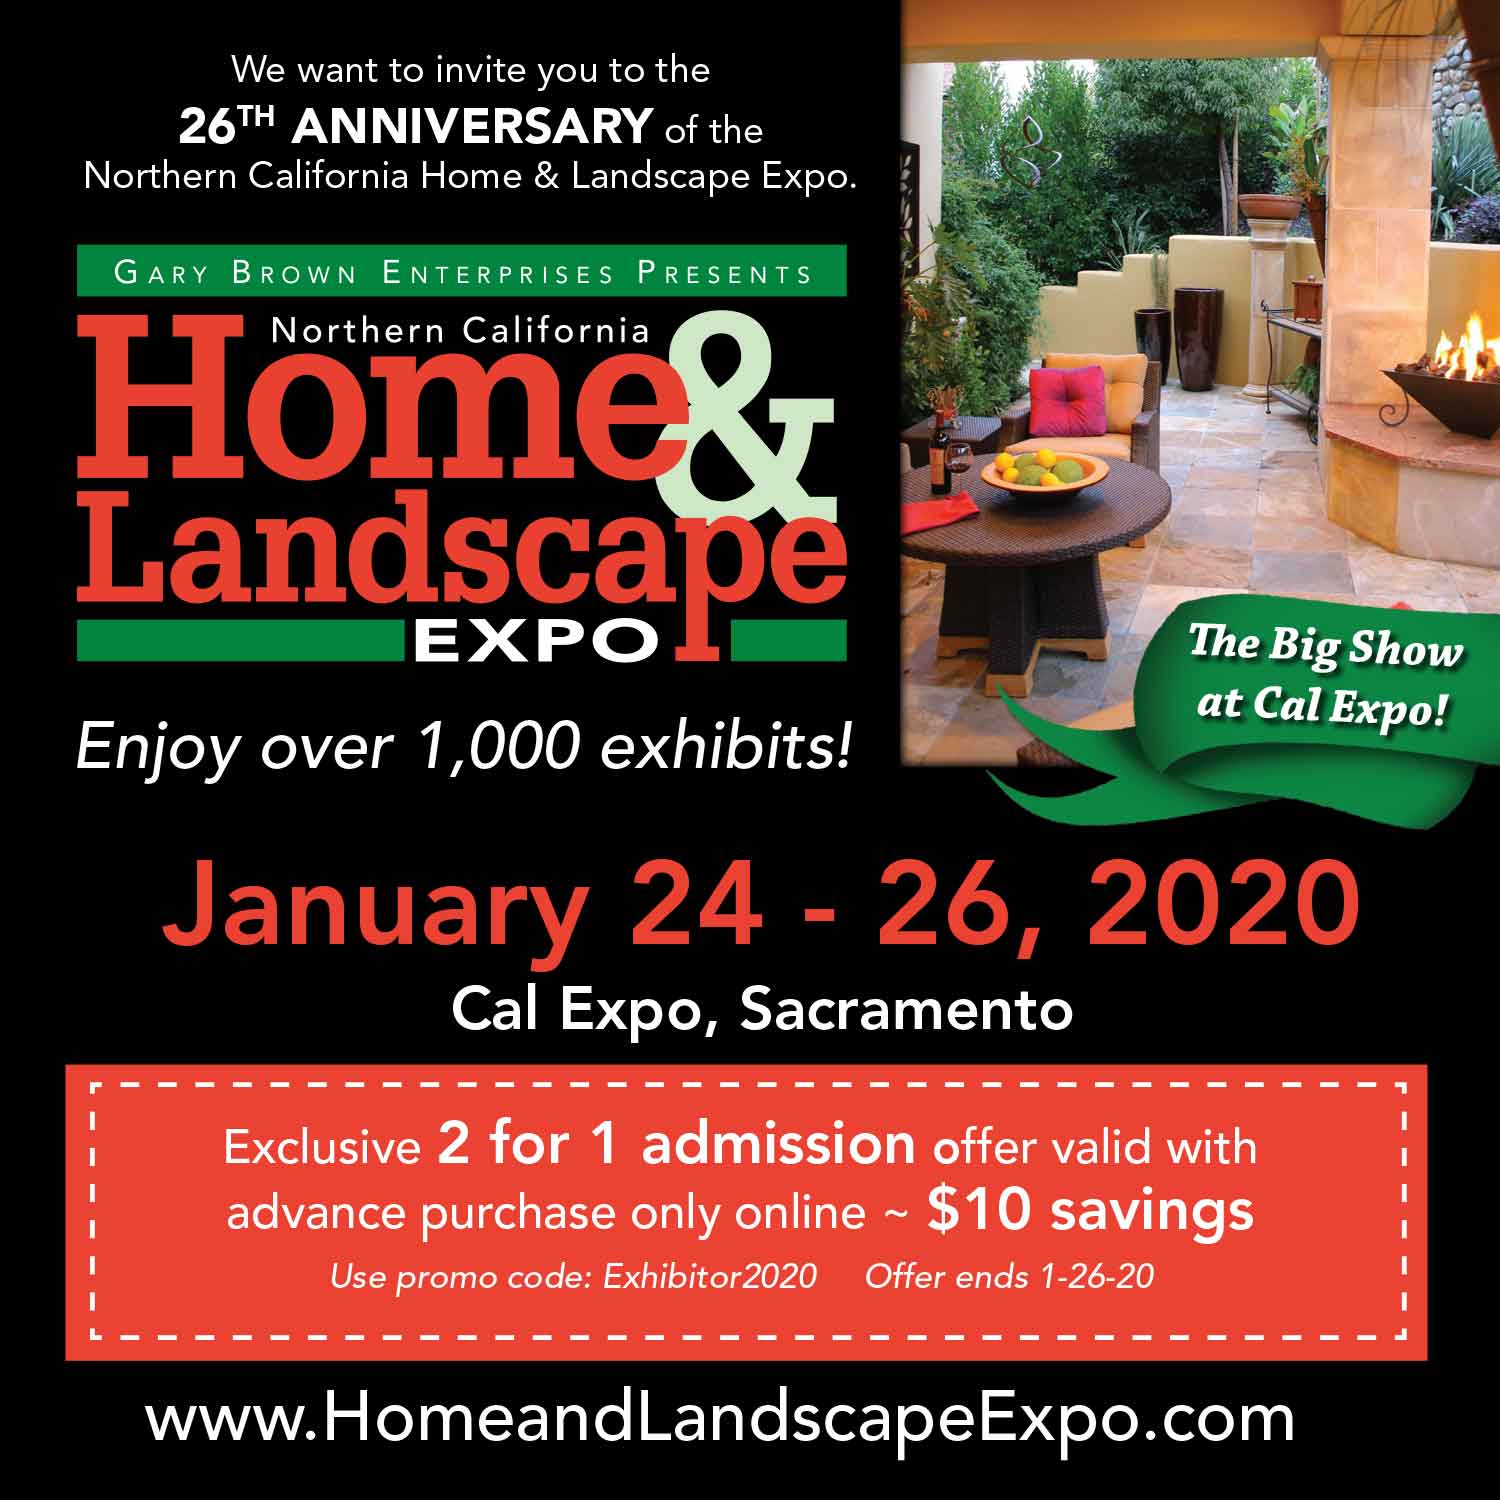 Come See Us at the Expo! Northern California Home and Landscape Expo